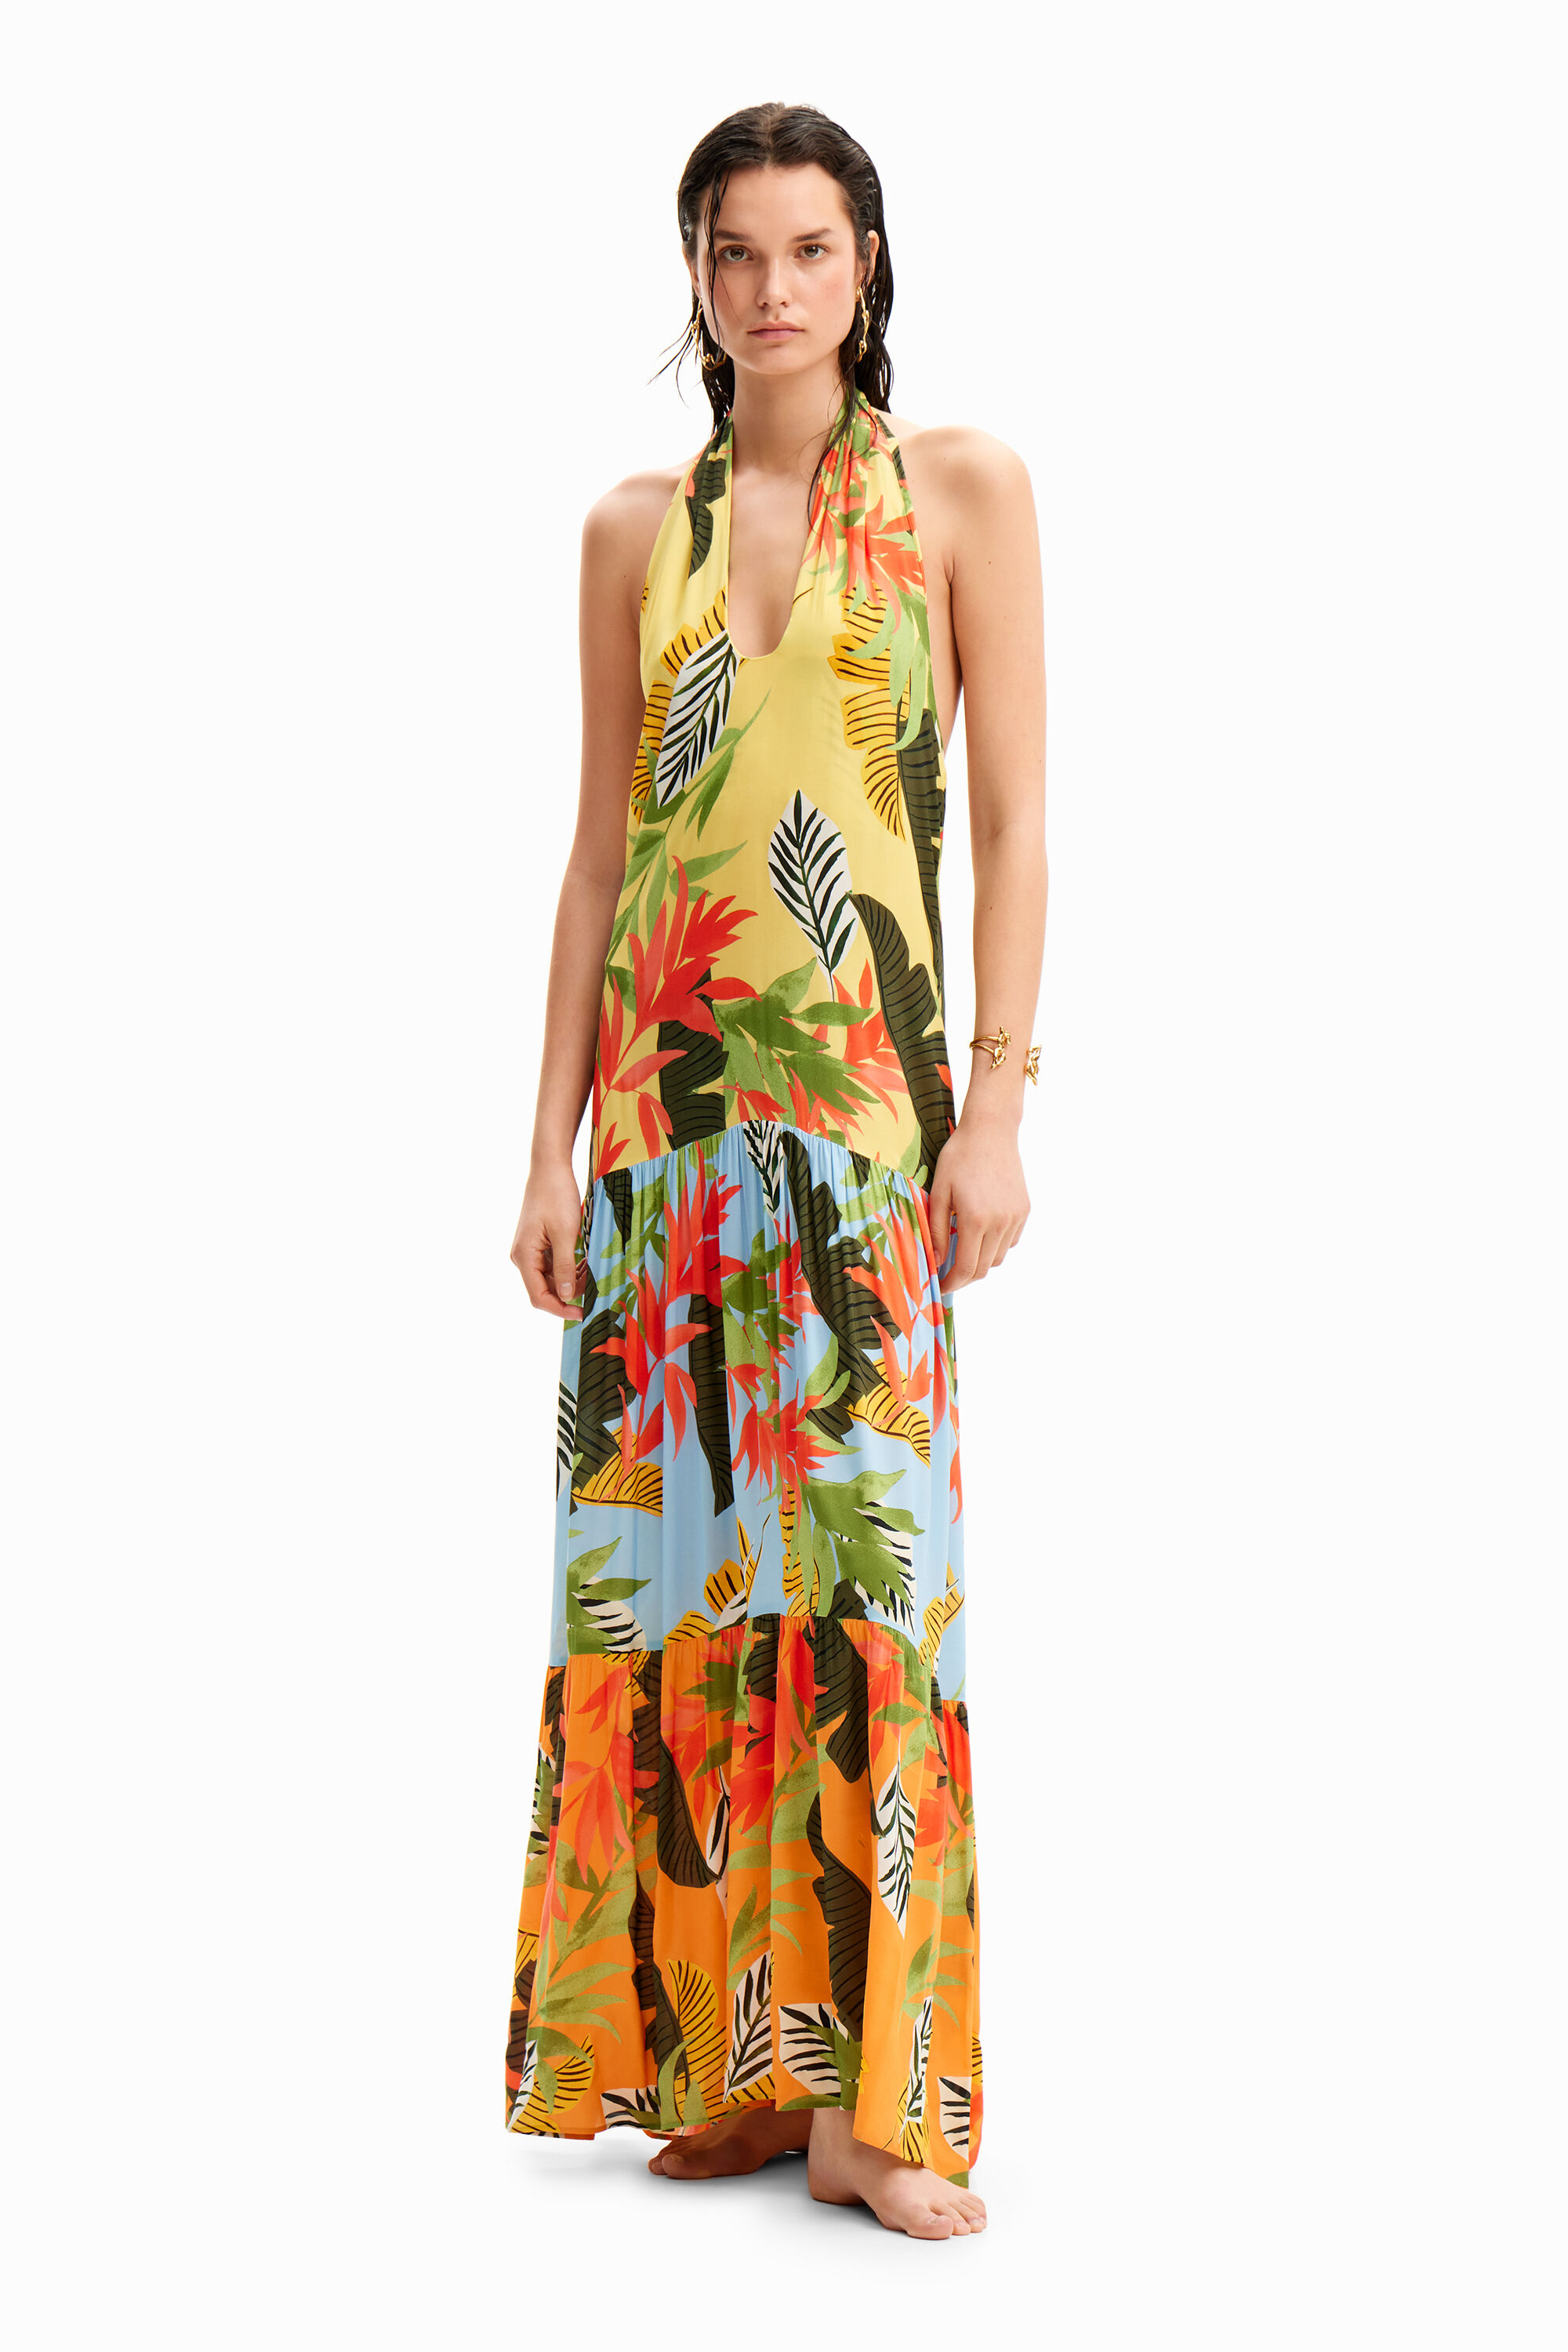 Tropical halter neck maxi dress - MATERIAL FINISHES - M